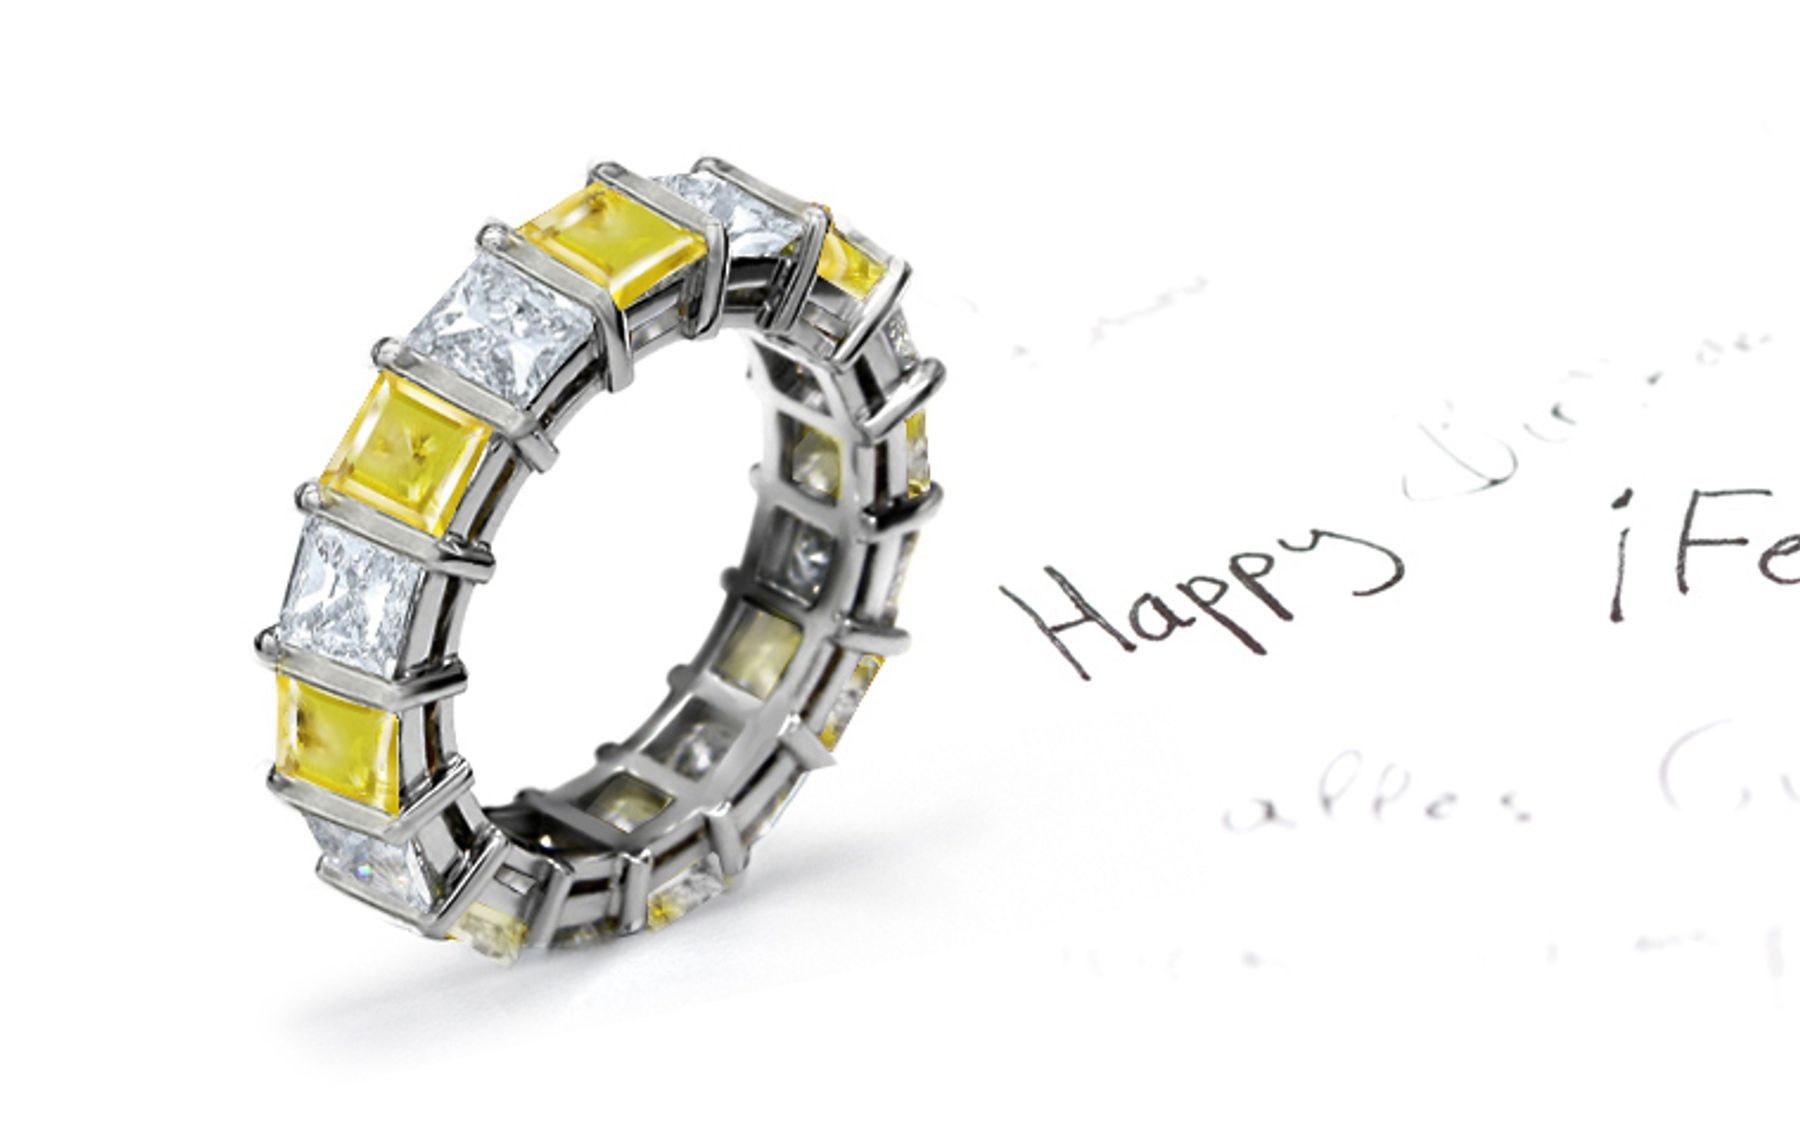 New Arrivals - This Yellow Sapphire & Diamond Ring Shows Sophistication